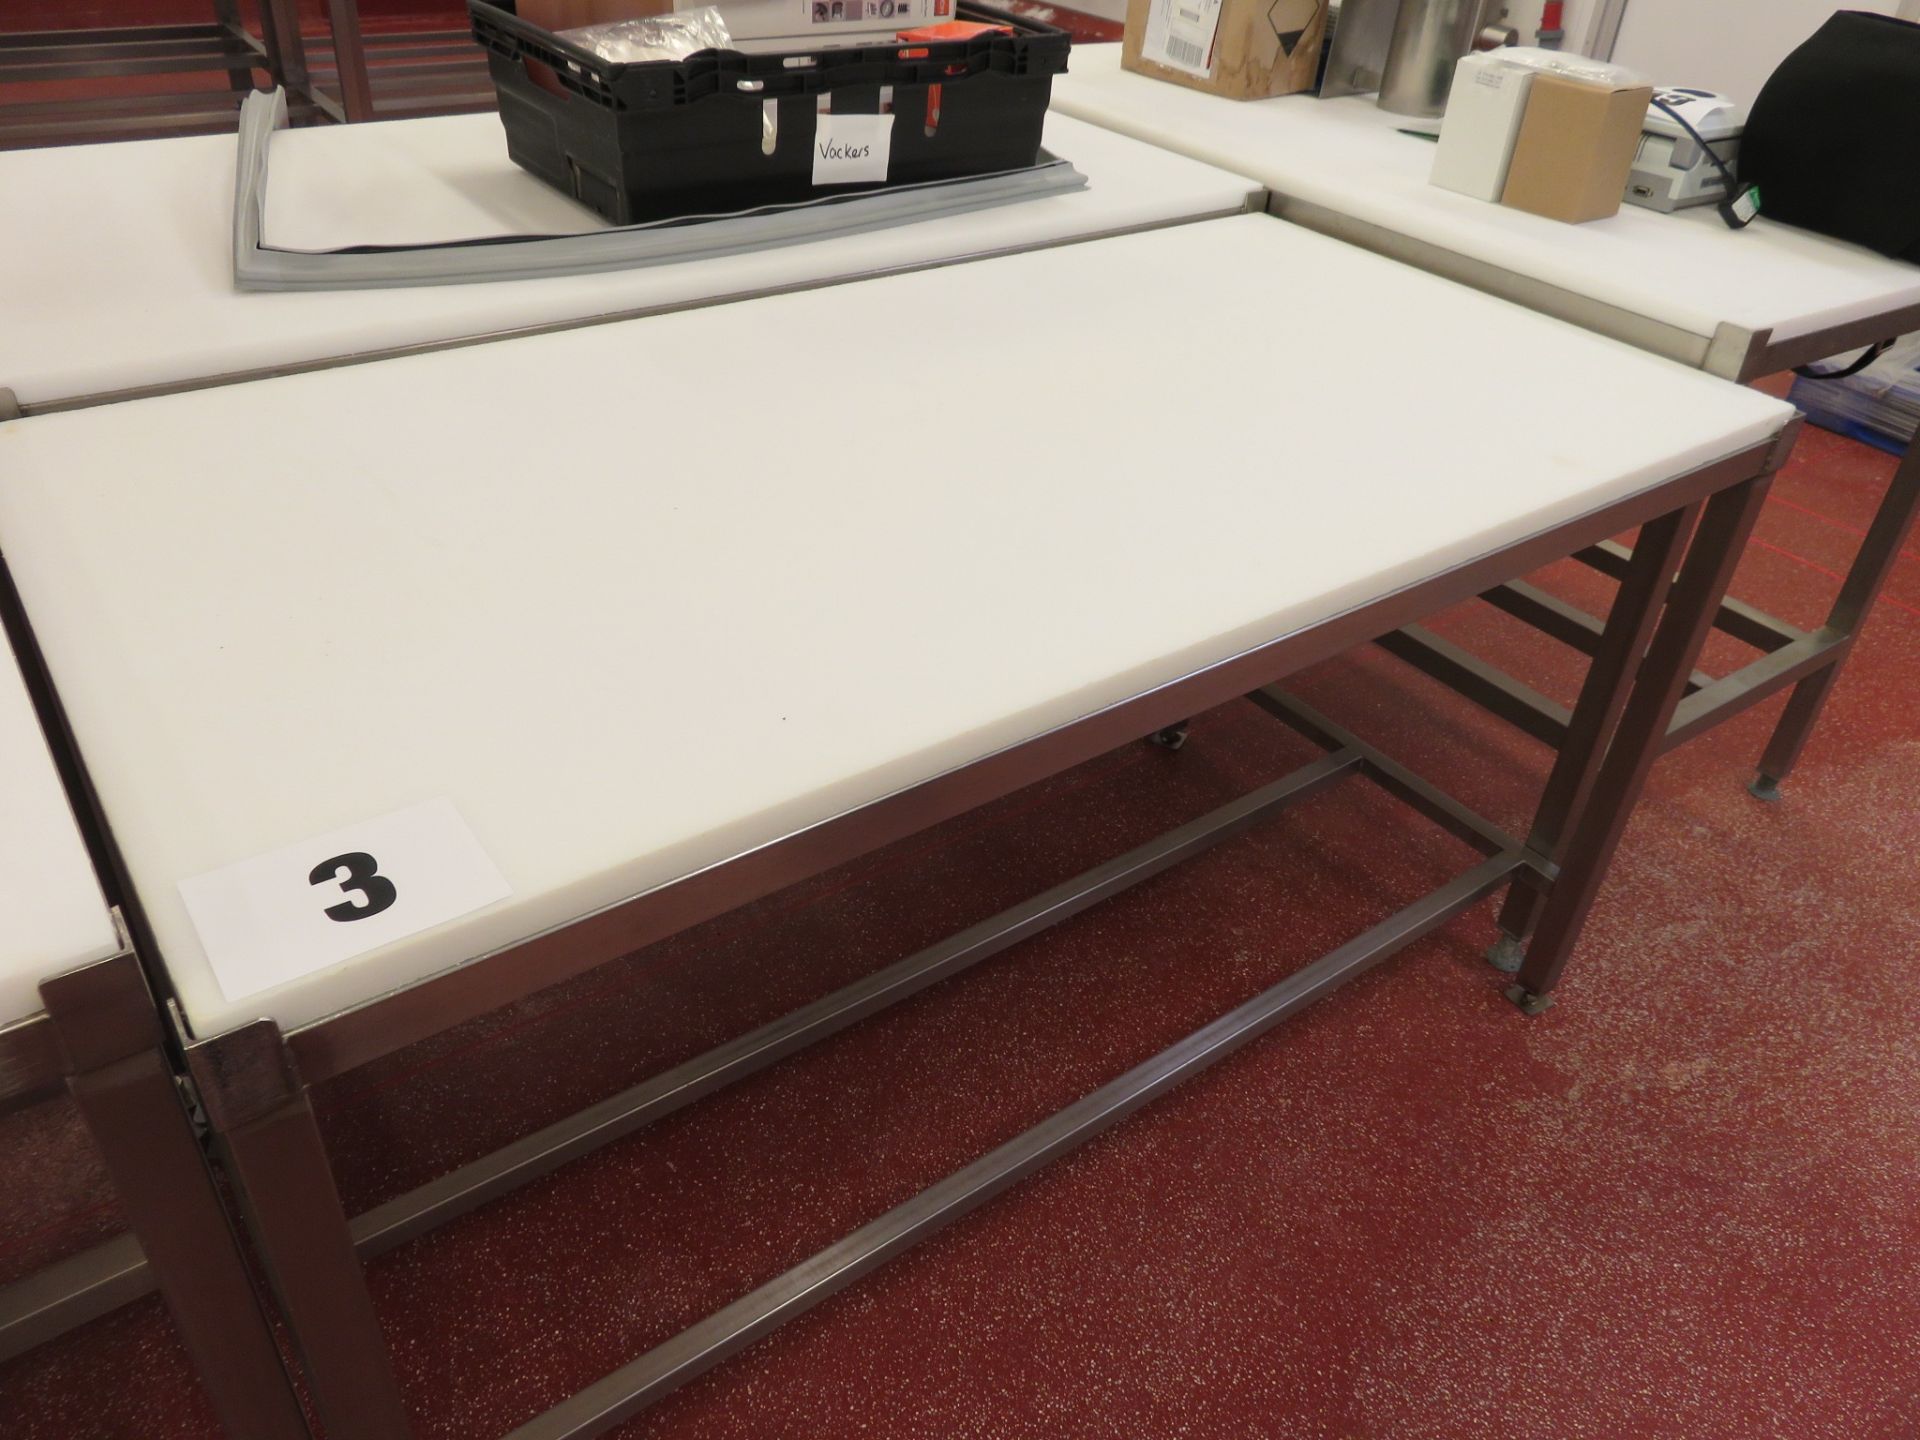 S/s Cutting Tables. 1.5 metres long x 750mm wide. Lift Out £15